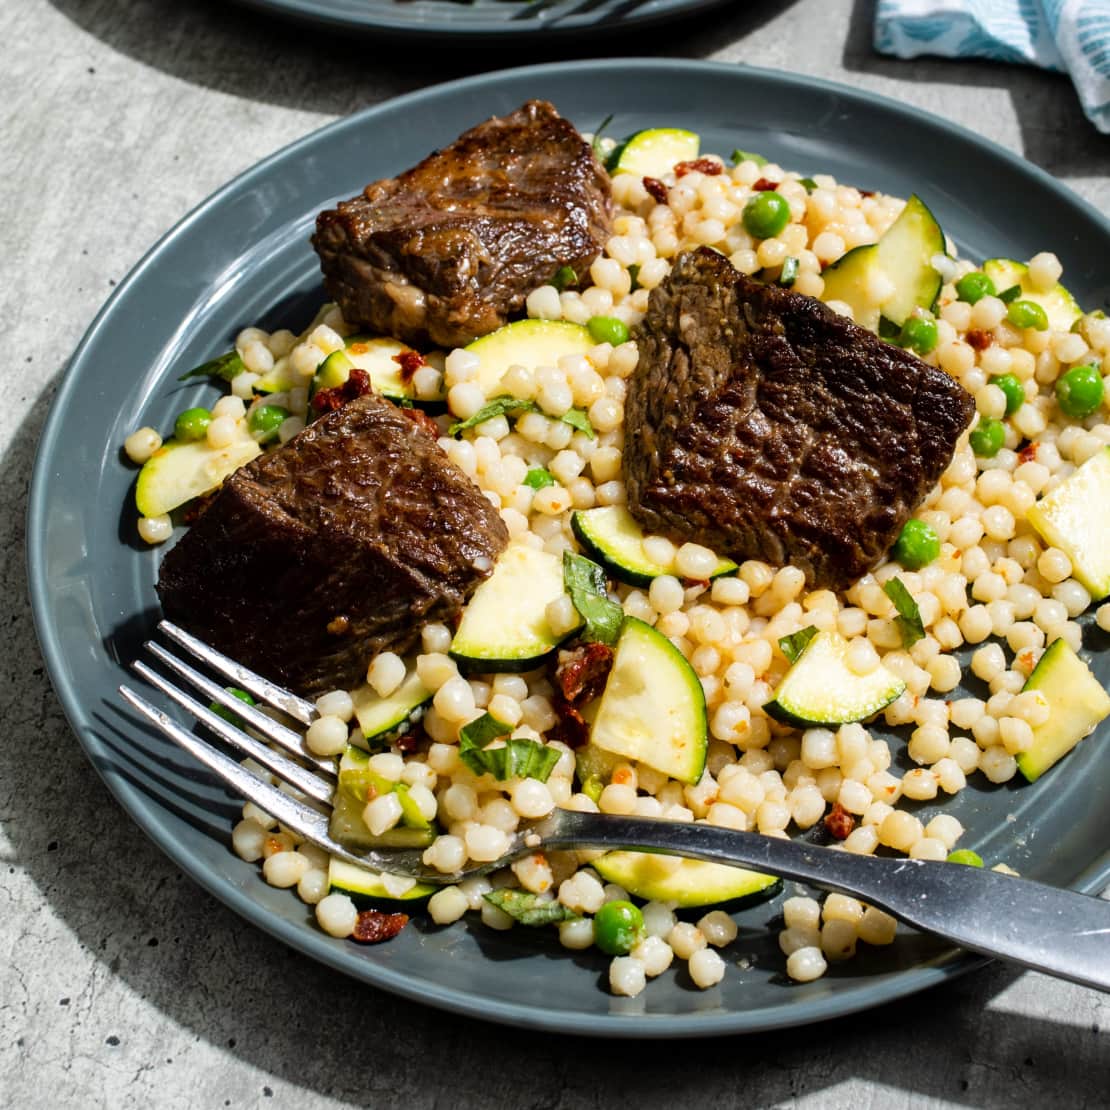 Lemony Steak Tips with Zucchini and Sun-Dried Tomato Couscous